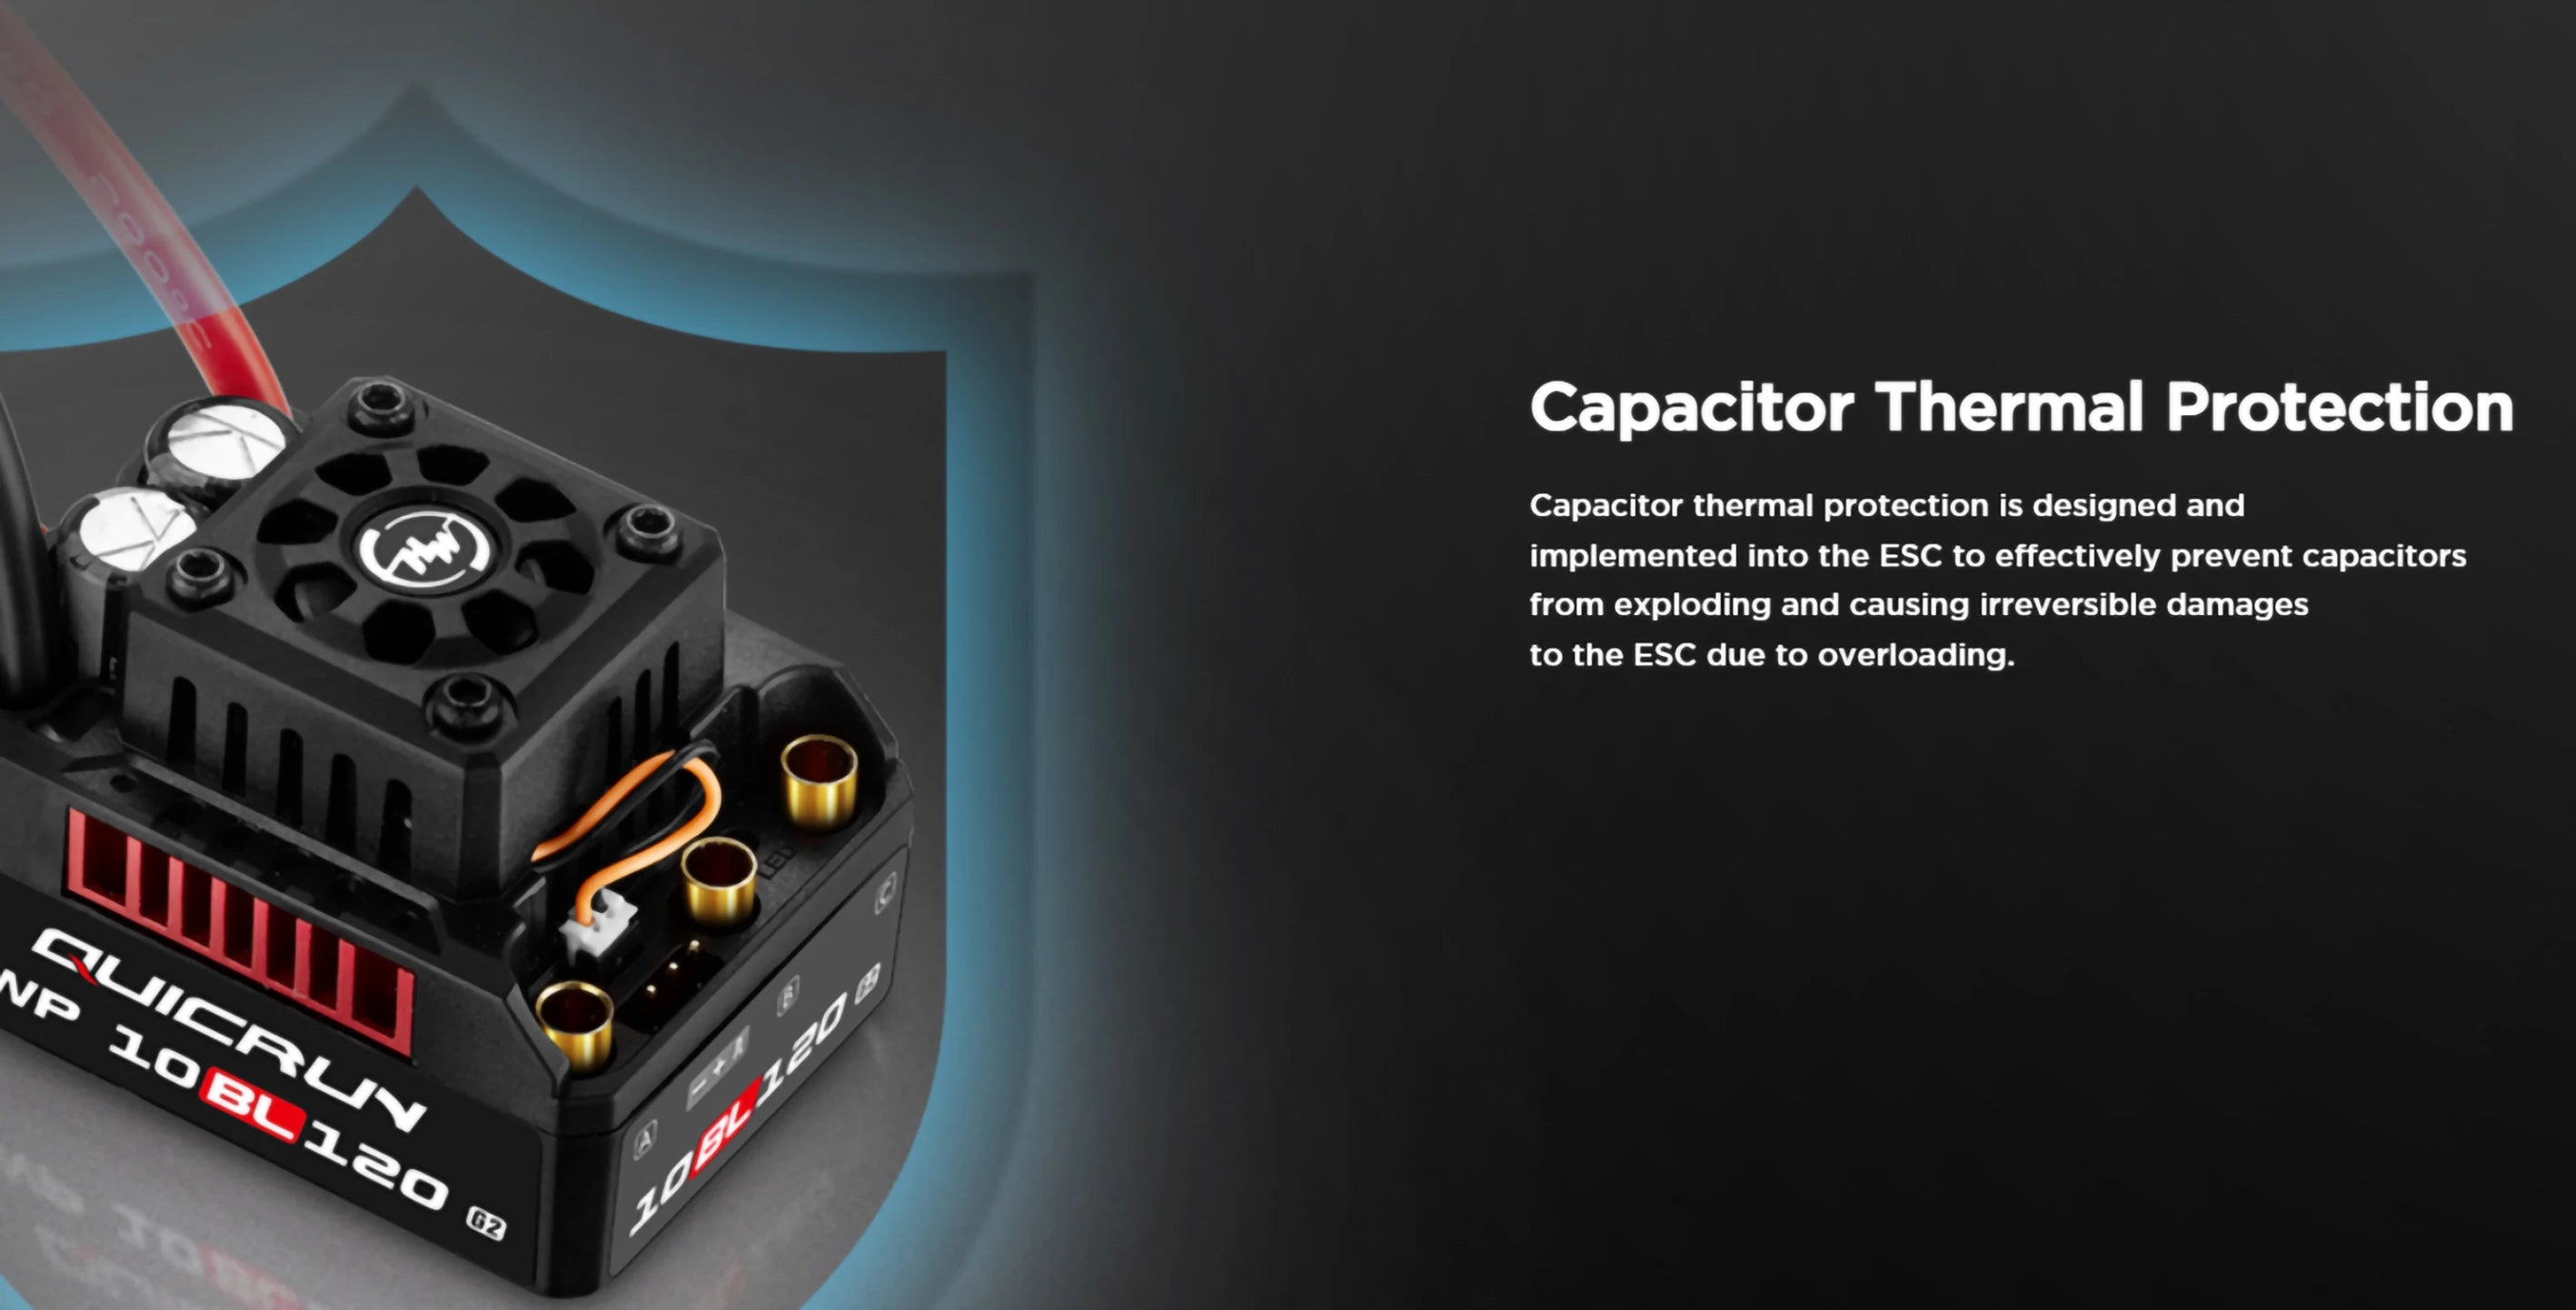 capacitor thermal protection is designed and implemented into the ESC to effectively prevent capacitors